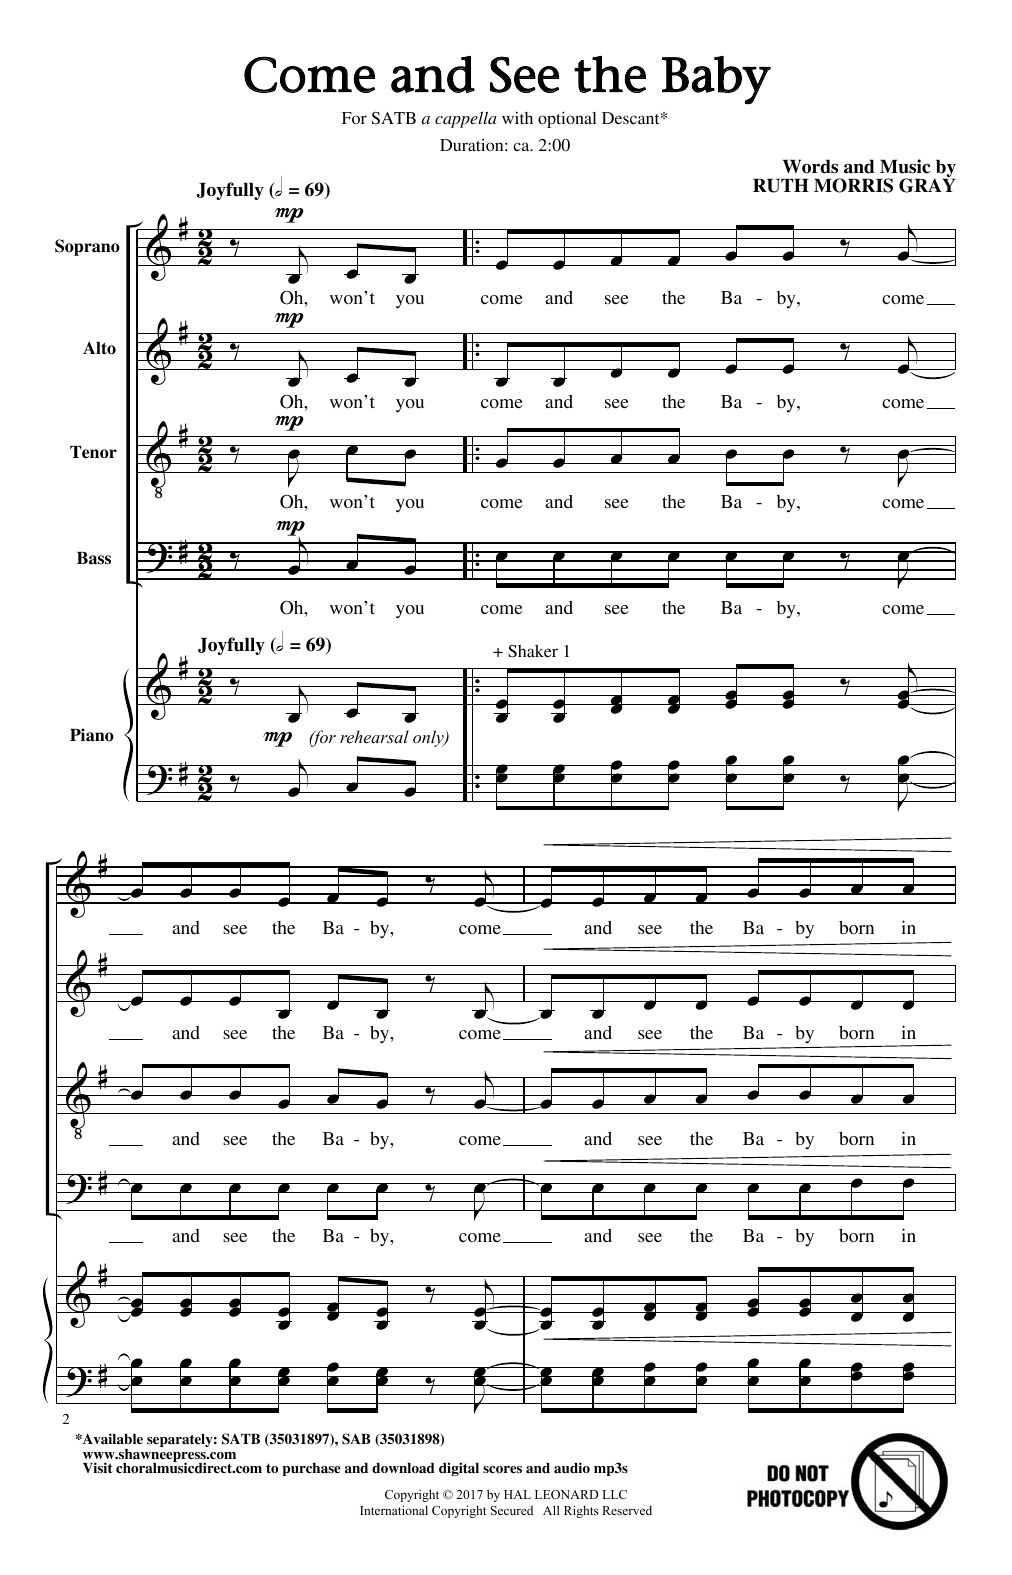 Download Ruth Morris Gray Come And See The Baby Sheet Music